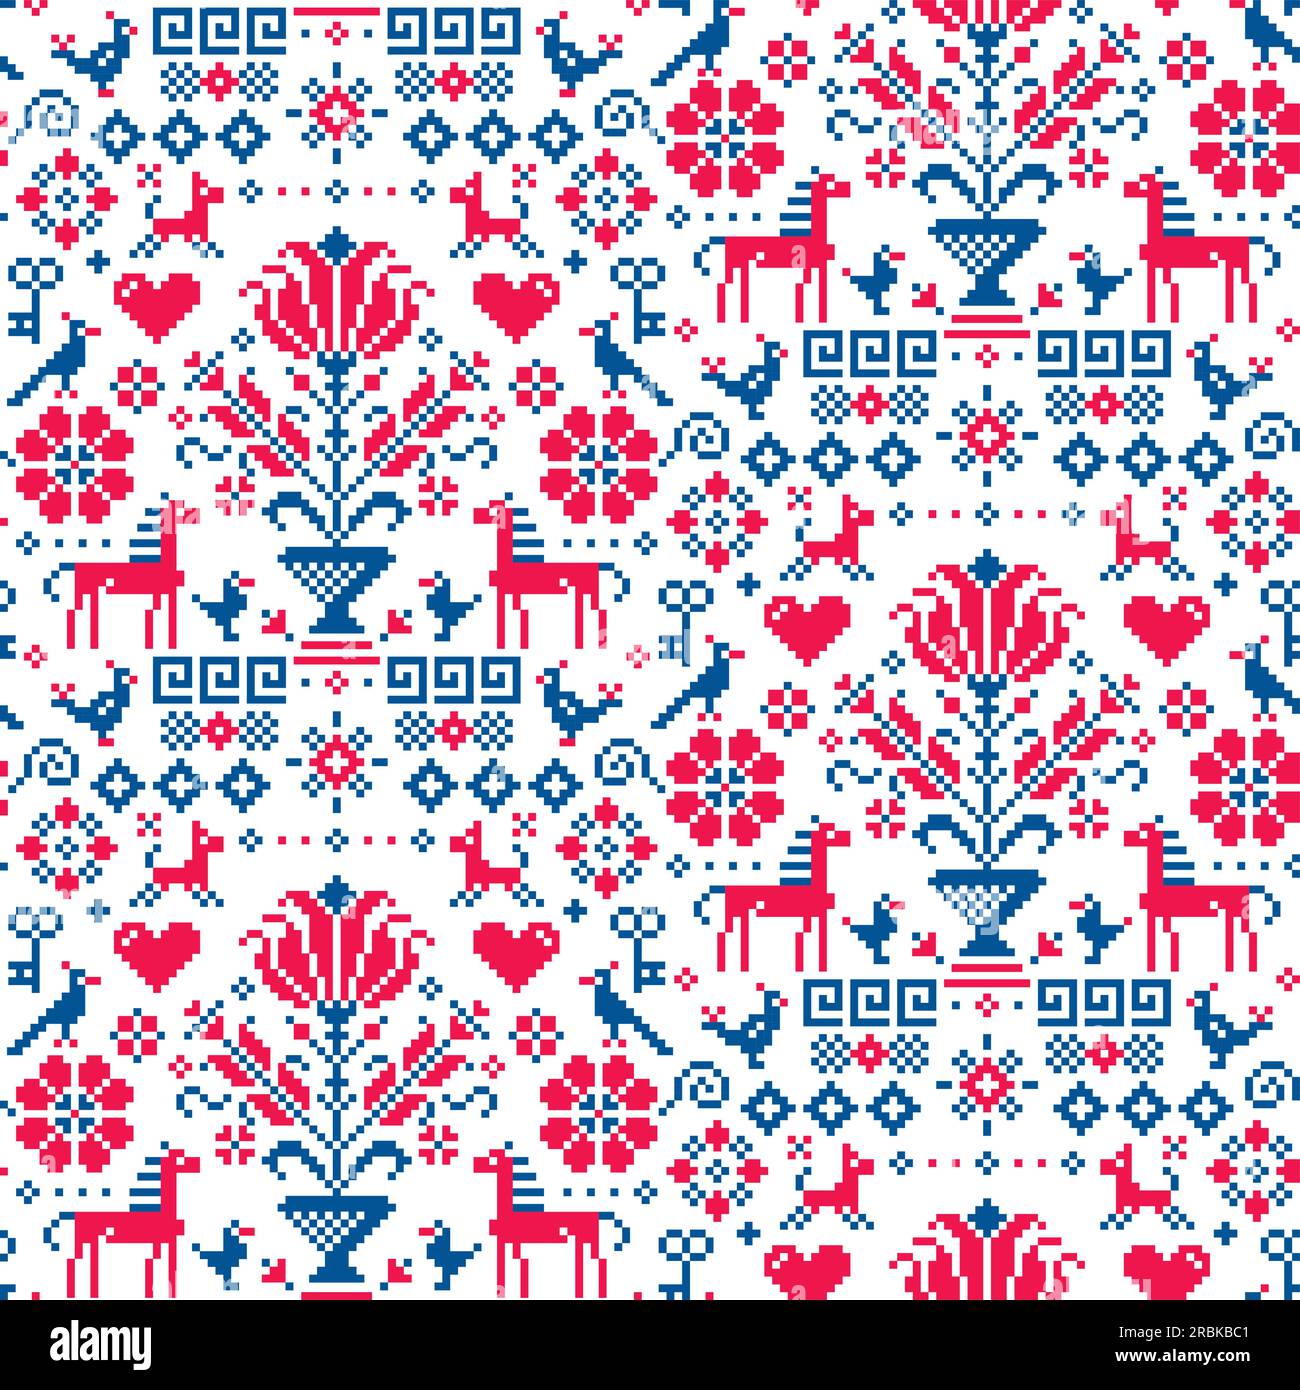 Retro ross stitch vector seamless folk art single pattern with flowers, birds and dogs - pixelated ornament inspired German folk art Stock Vector